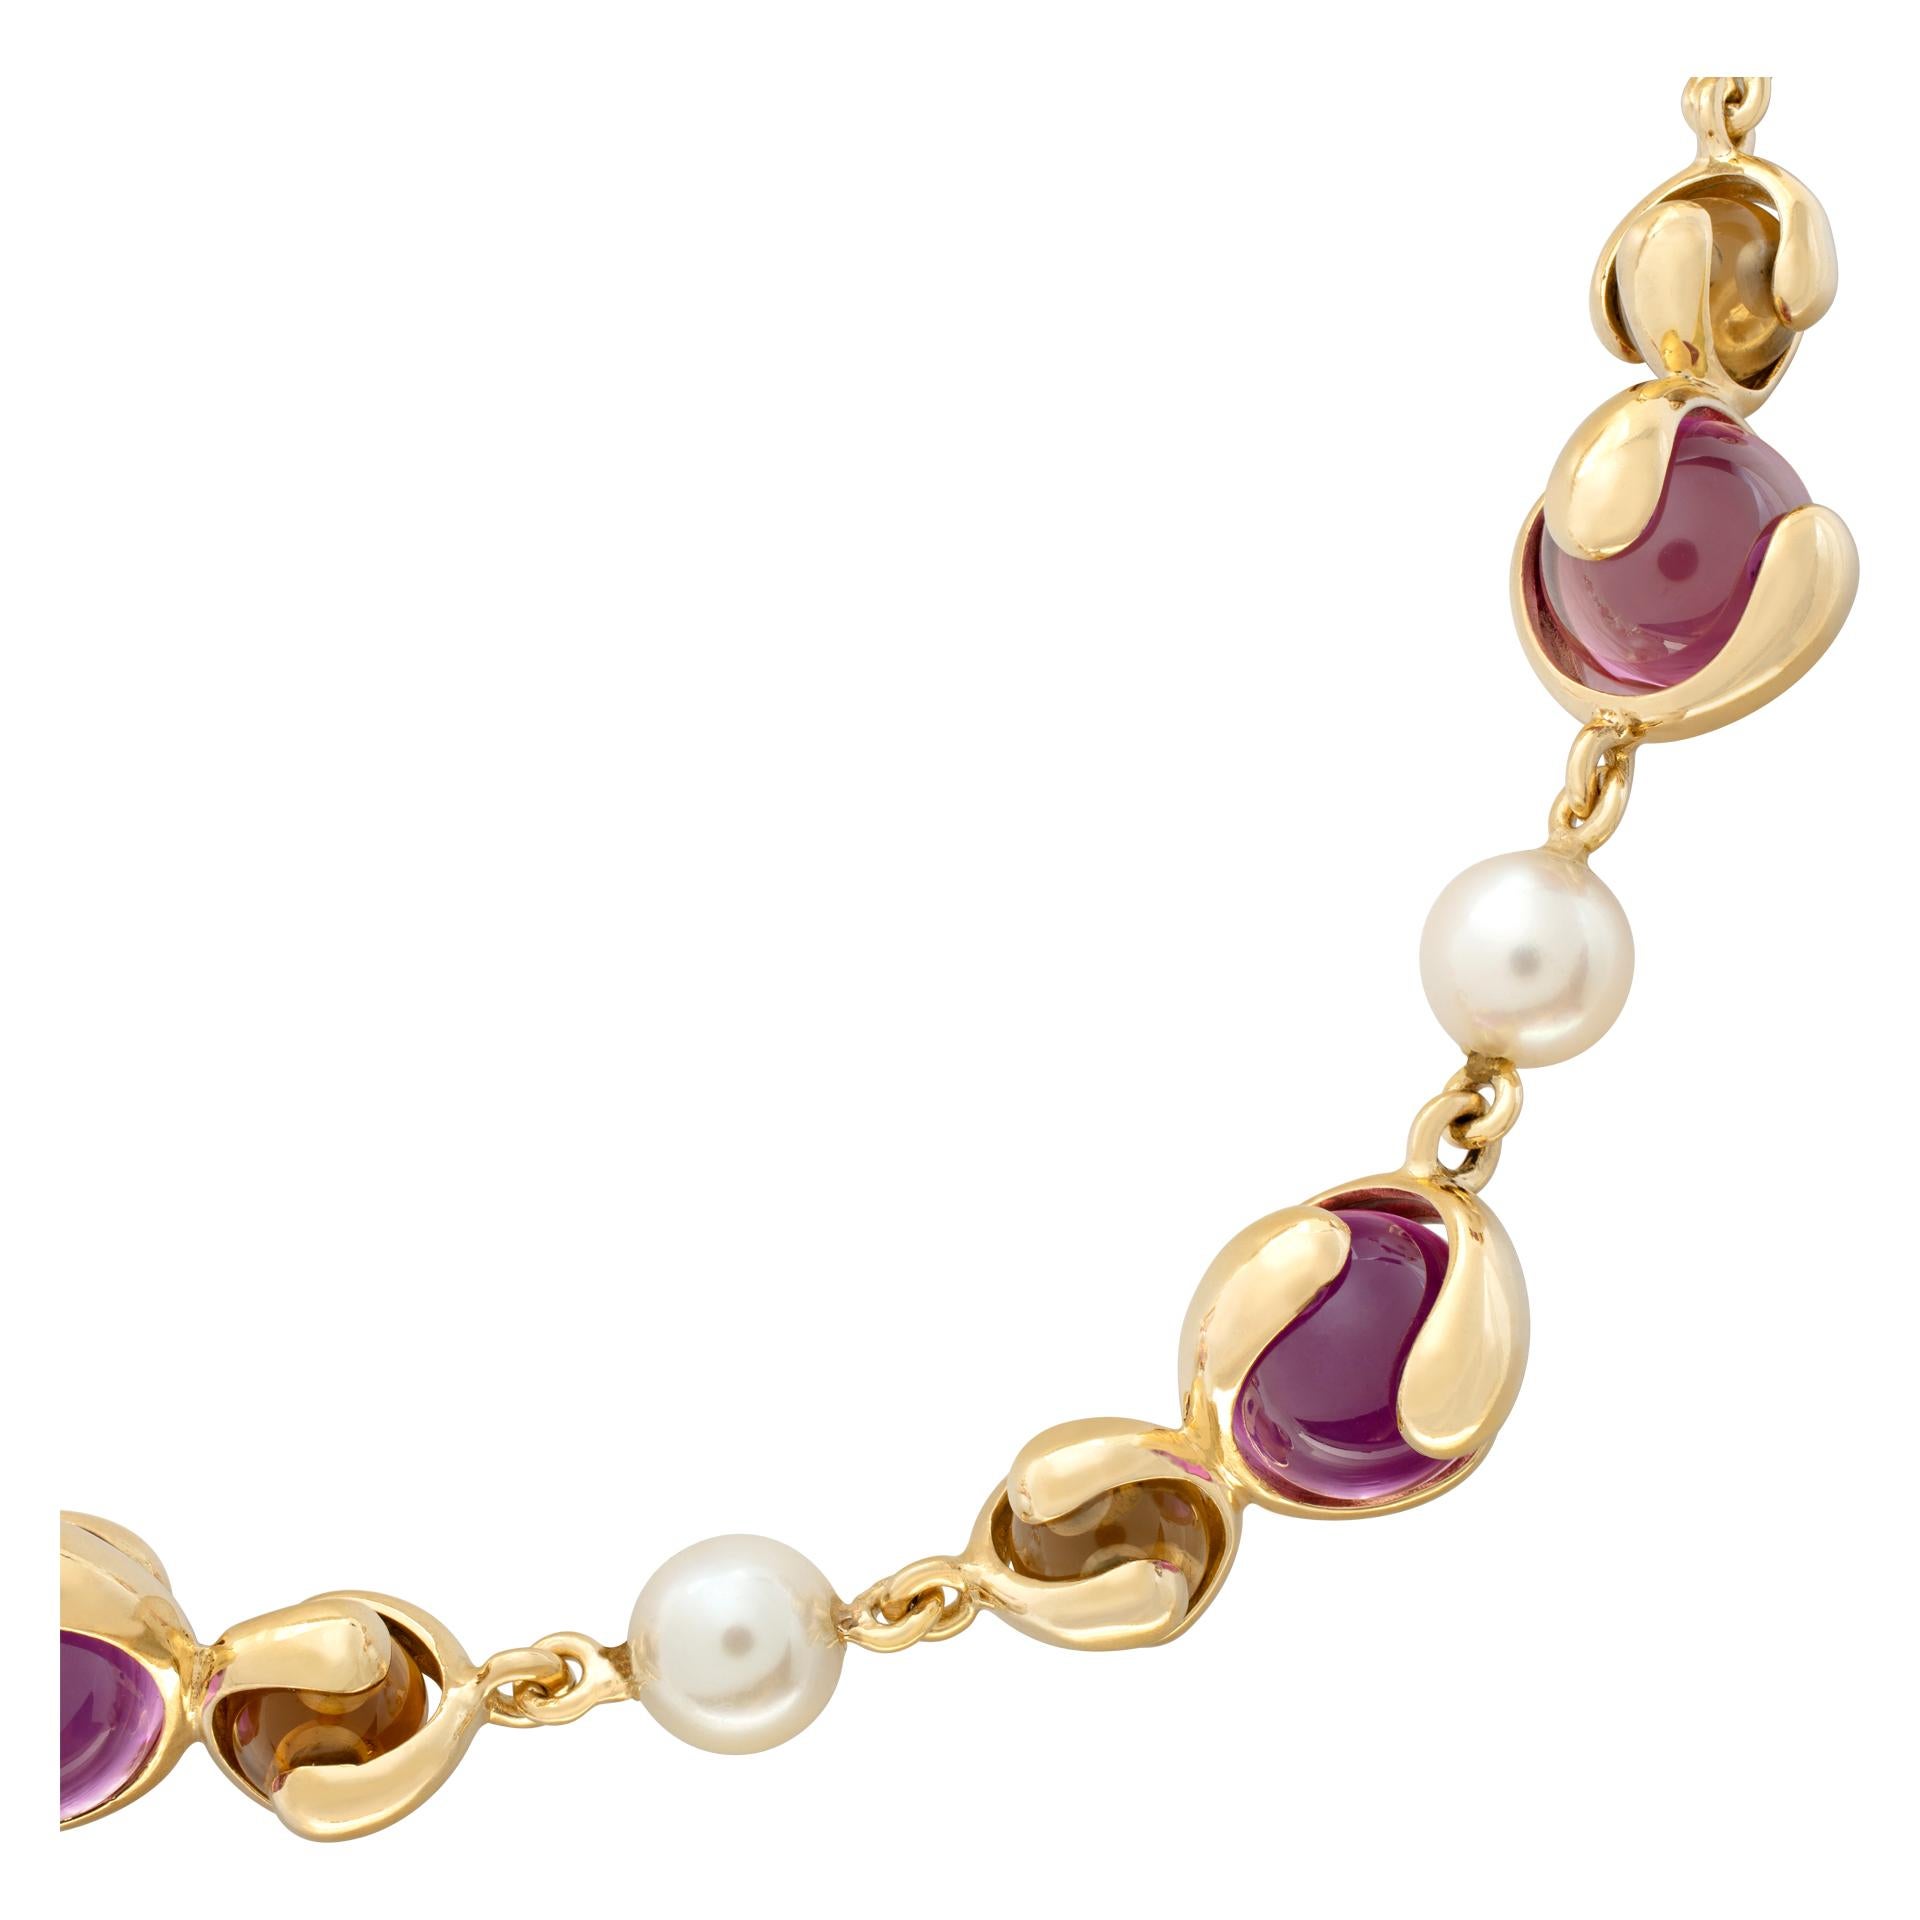 Marina B Cardan Necklace with vibrant pink Russian quartz, citrine, and lusterous 7.3mm pearls in 18k yellow gold. Measures 16 inches.
